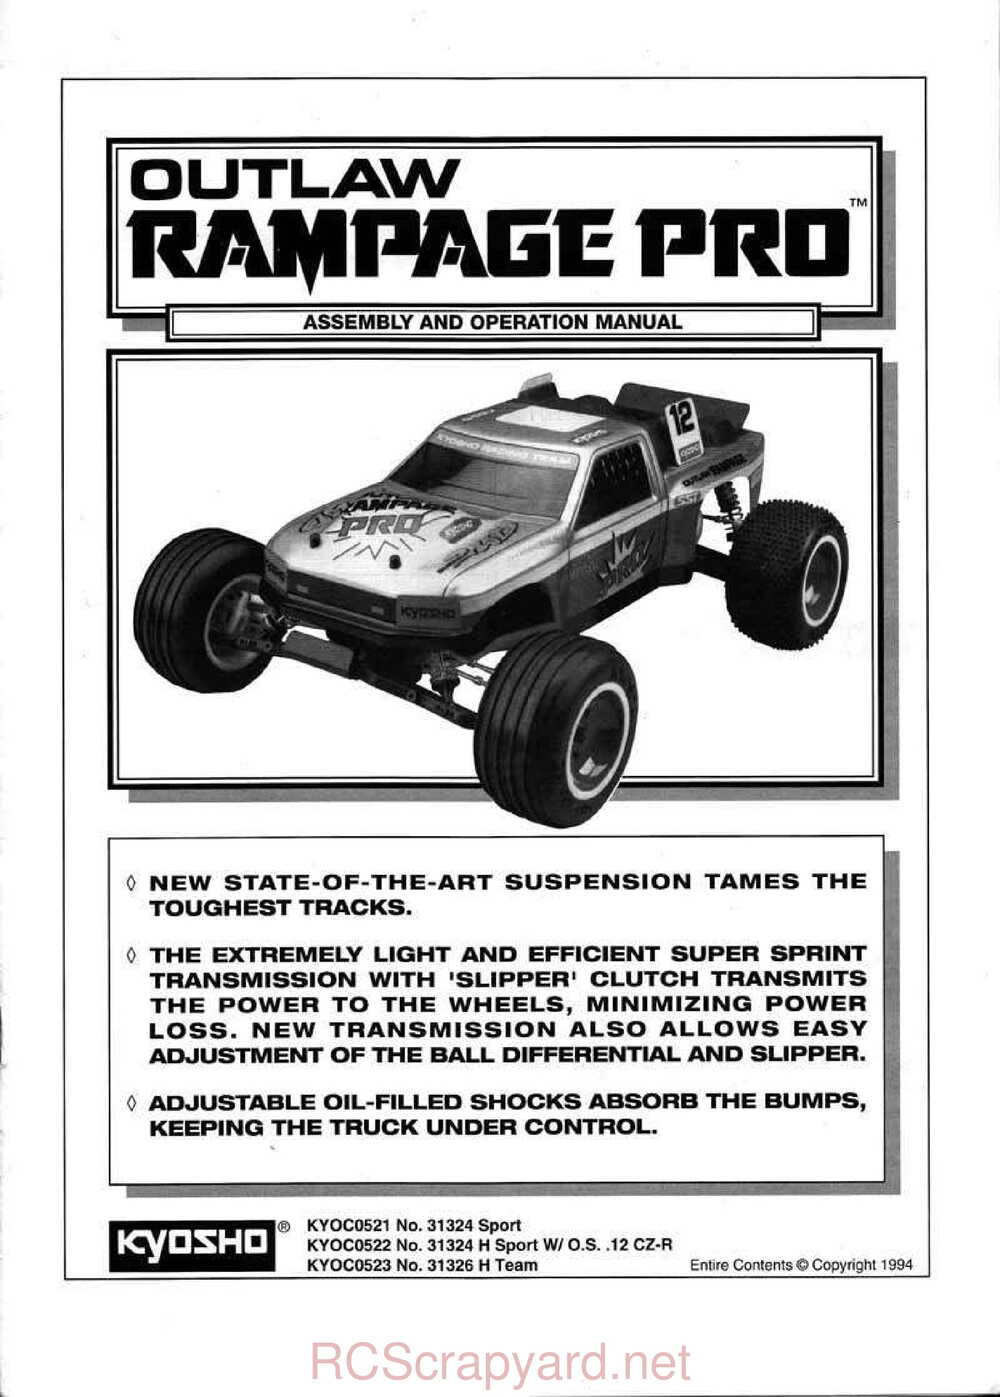 Kyosho - 31324 - 31326 - Outlaw-Rampage - Manual - Page 01